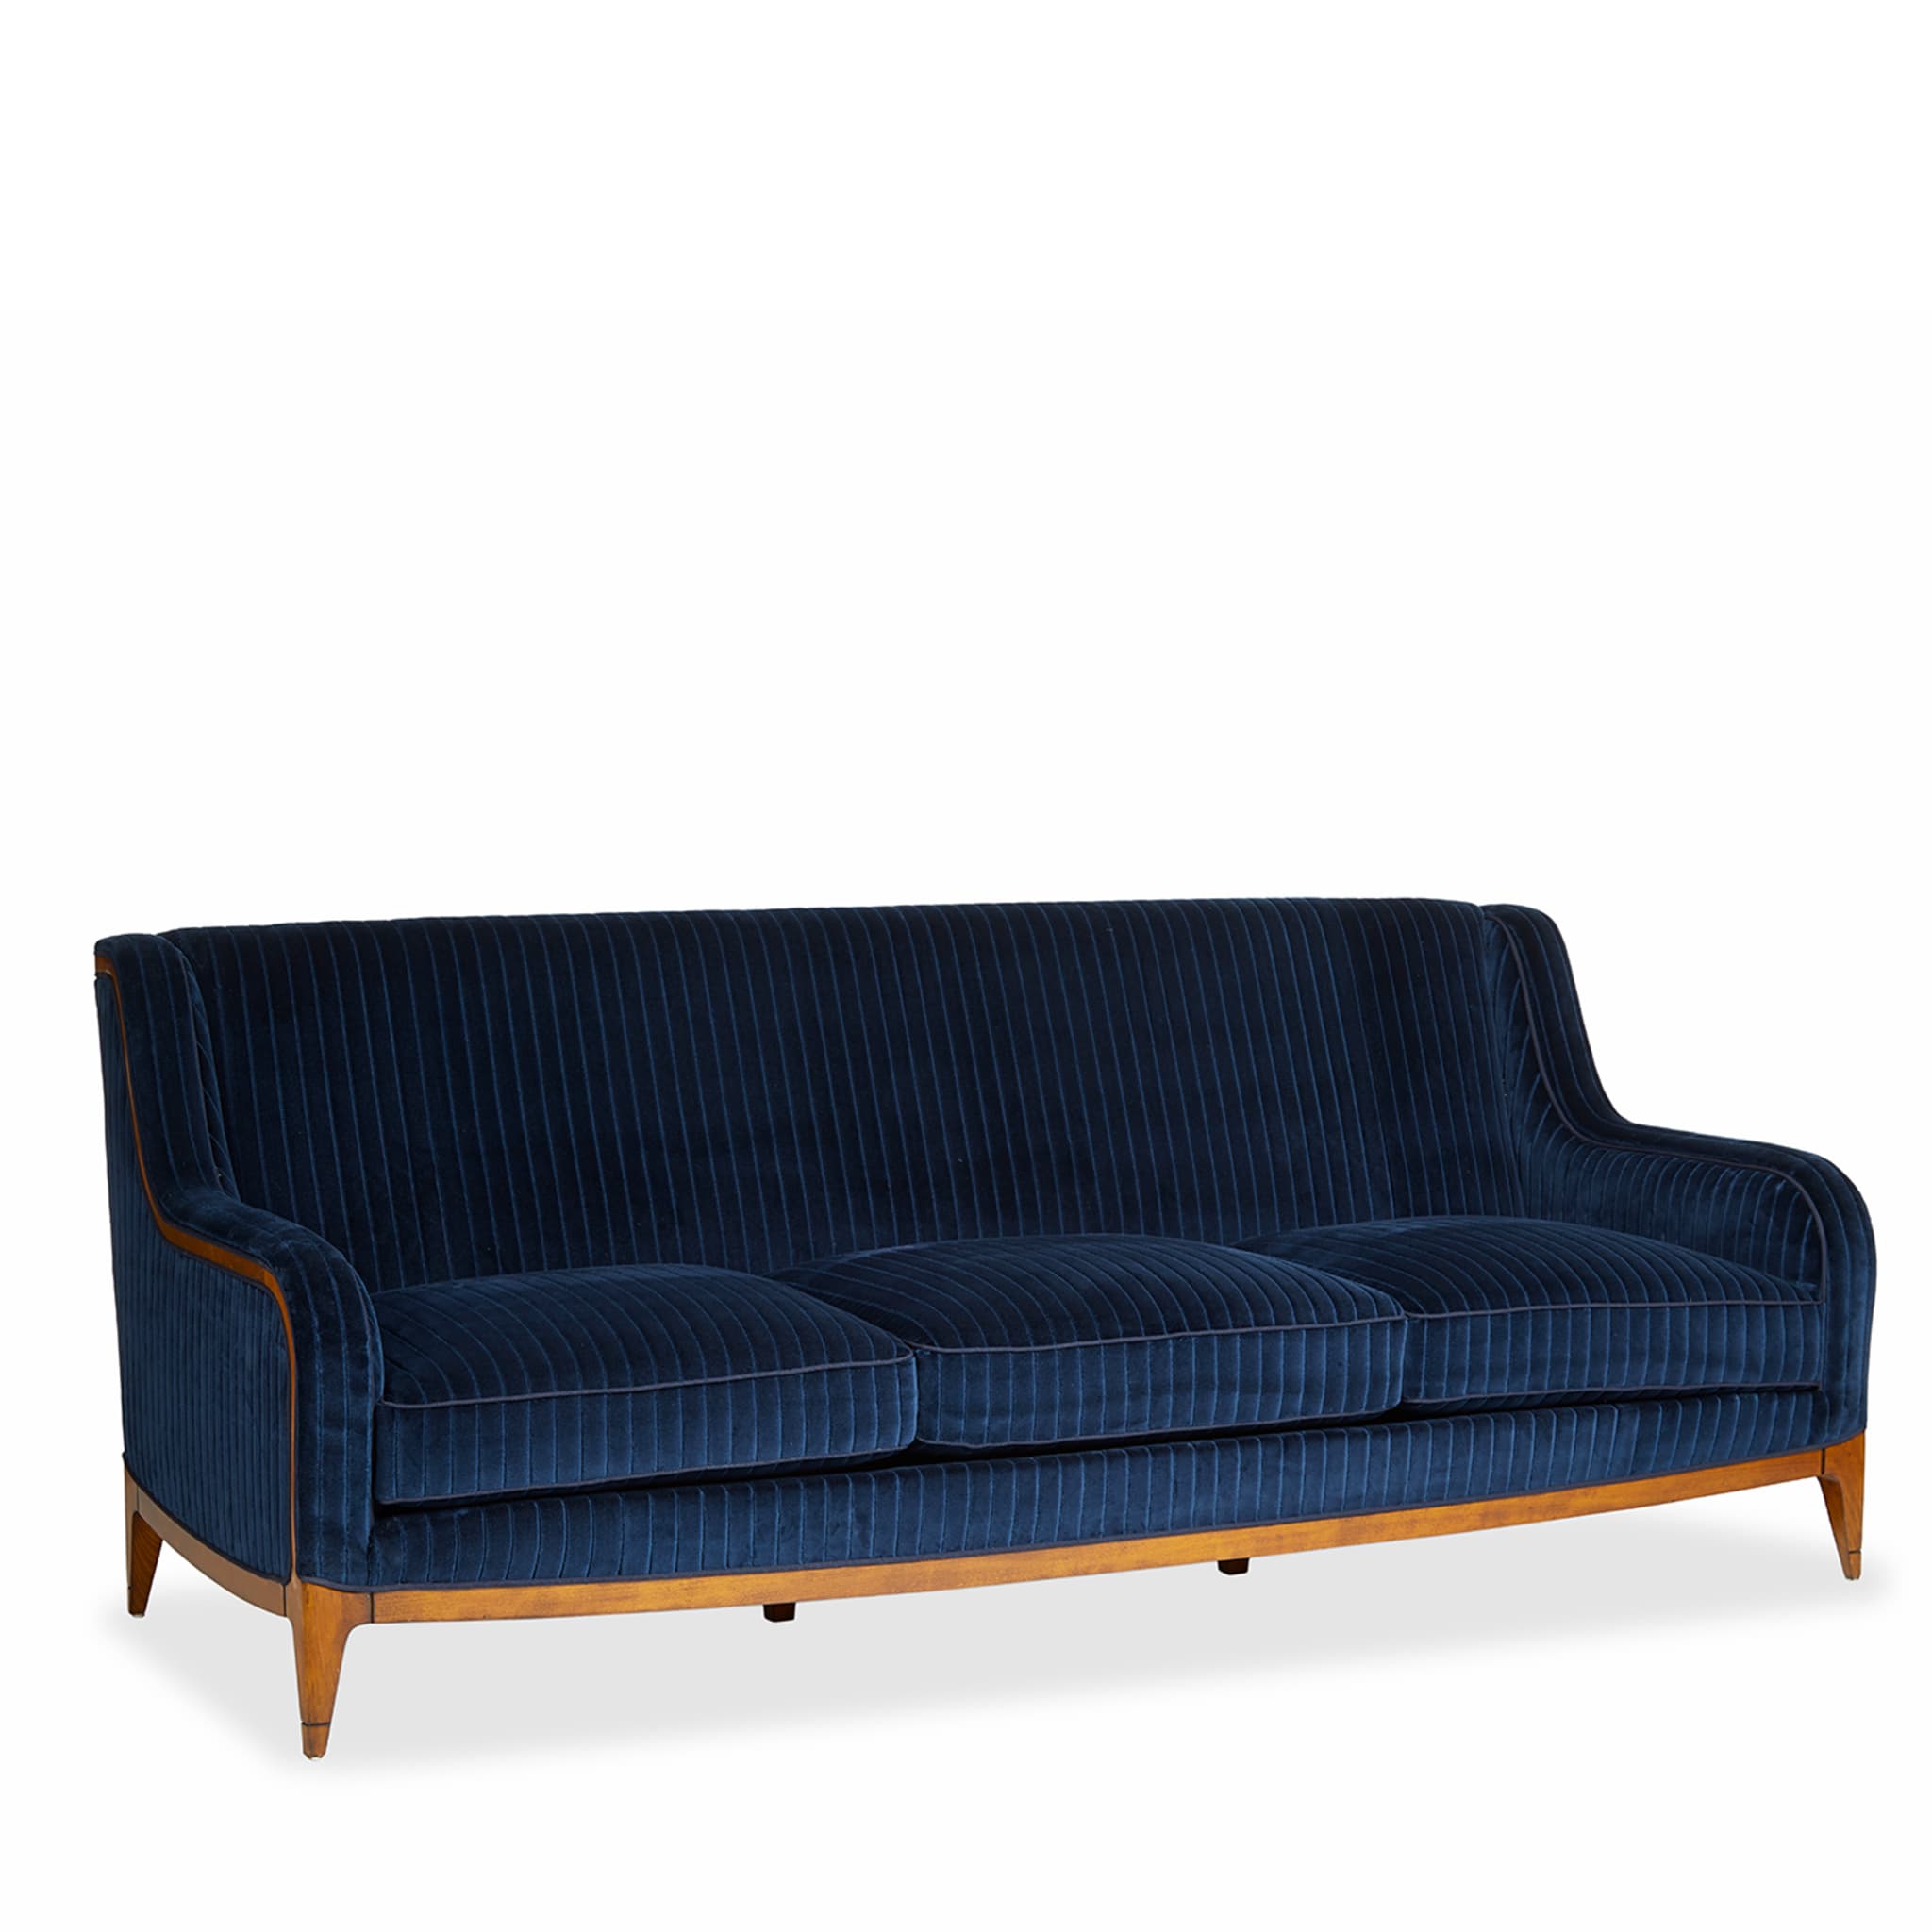 Futura 3-Seater Quilted Blue Sofa - Alternative view 1